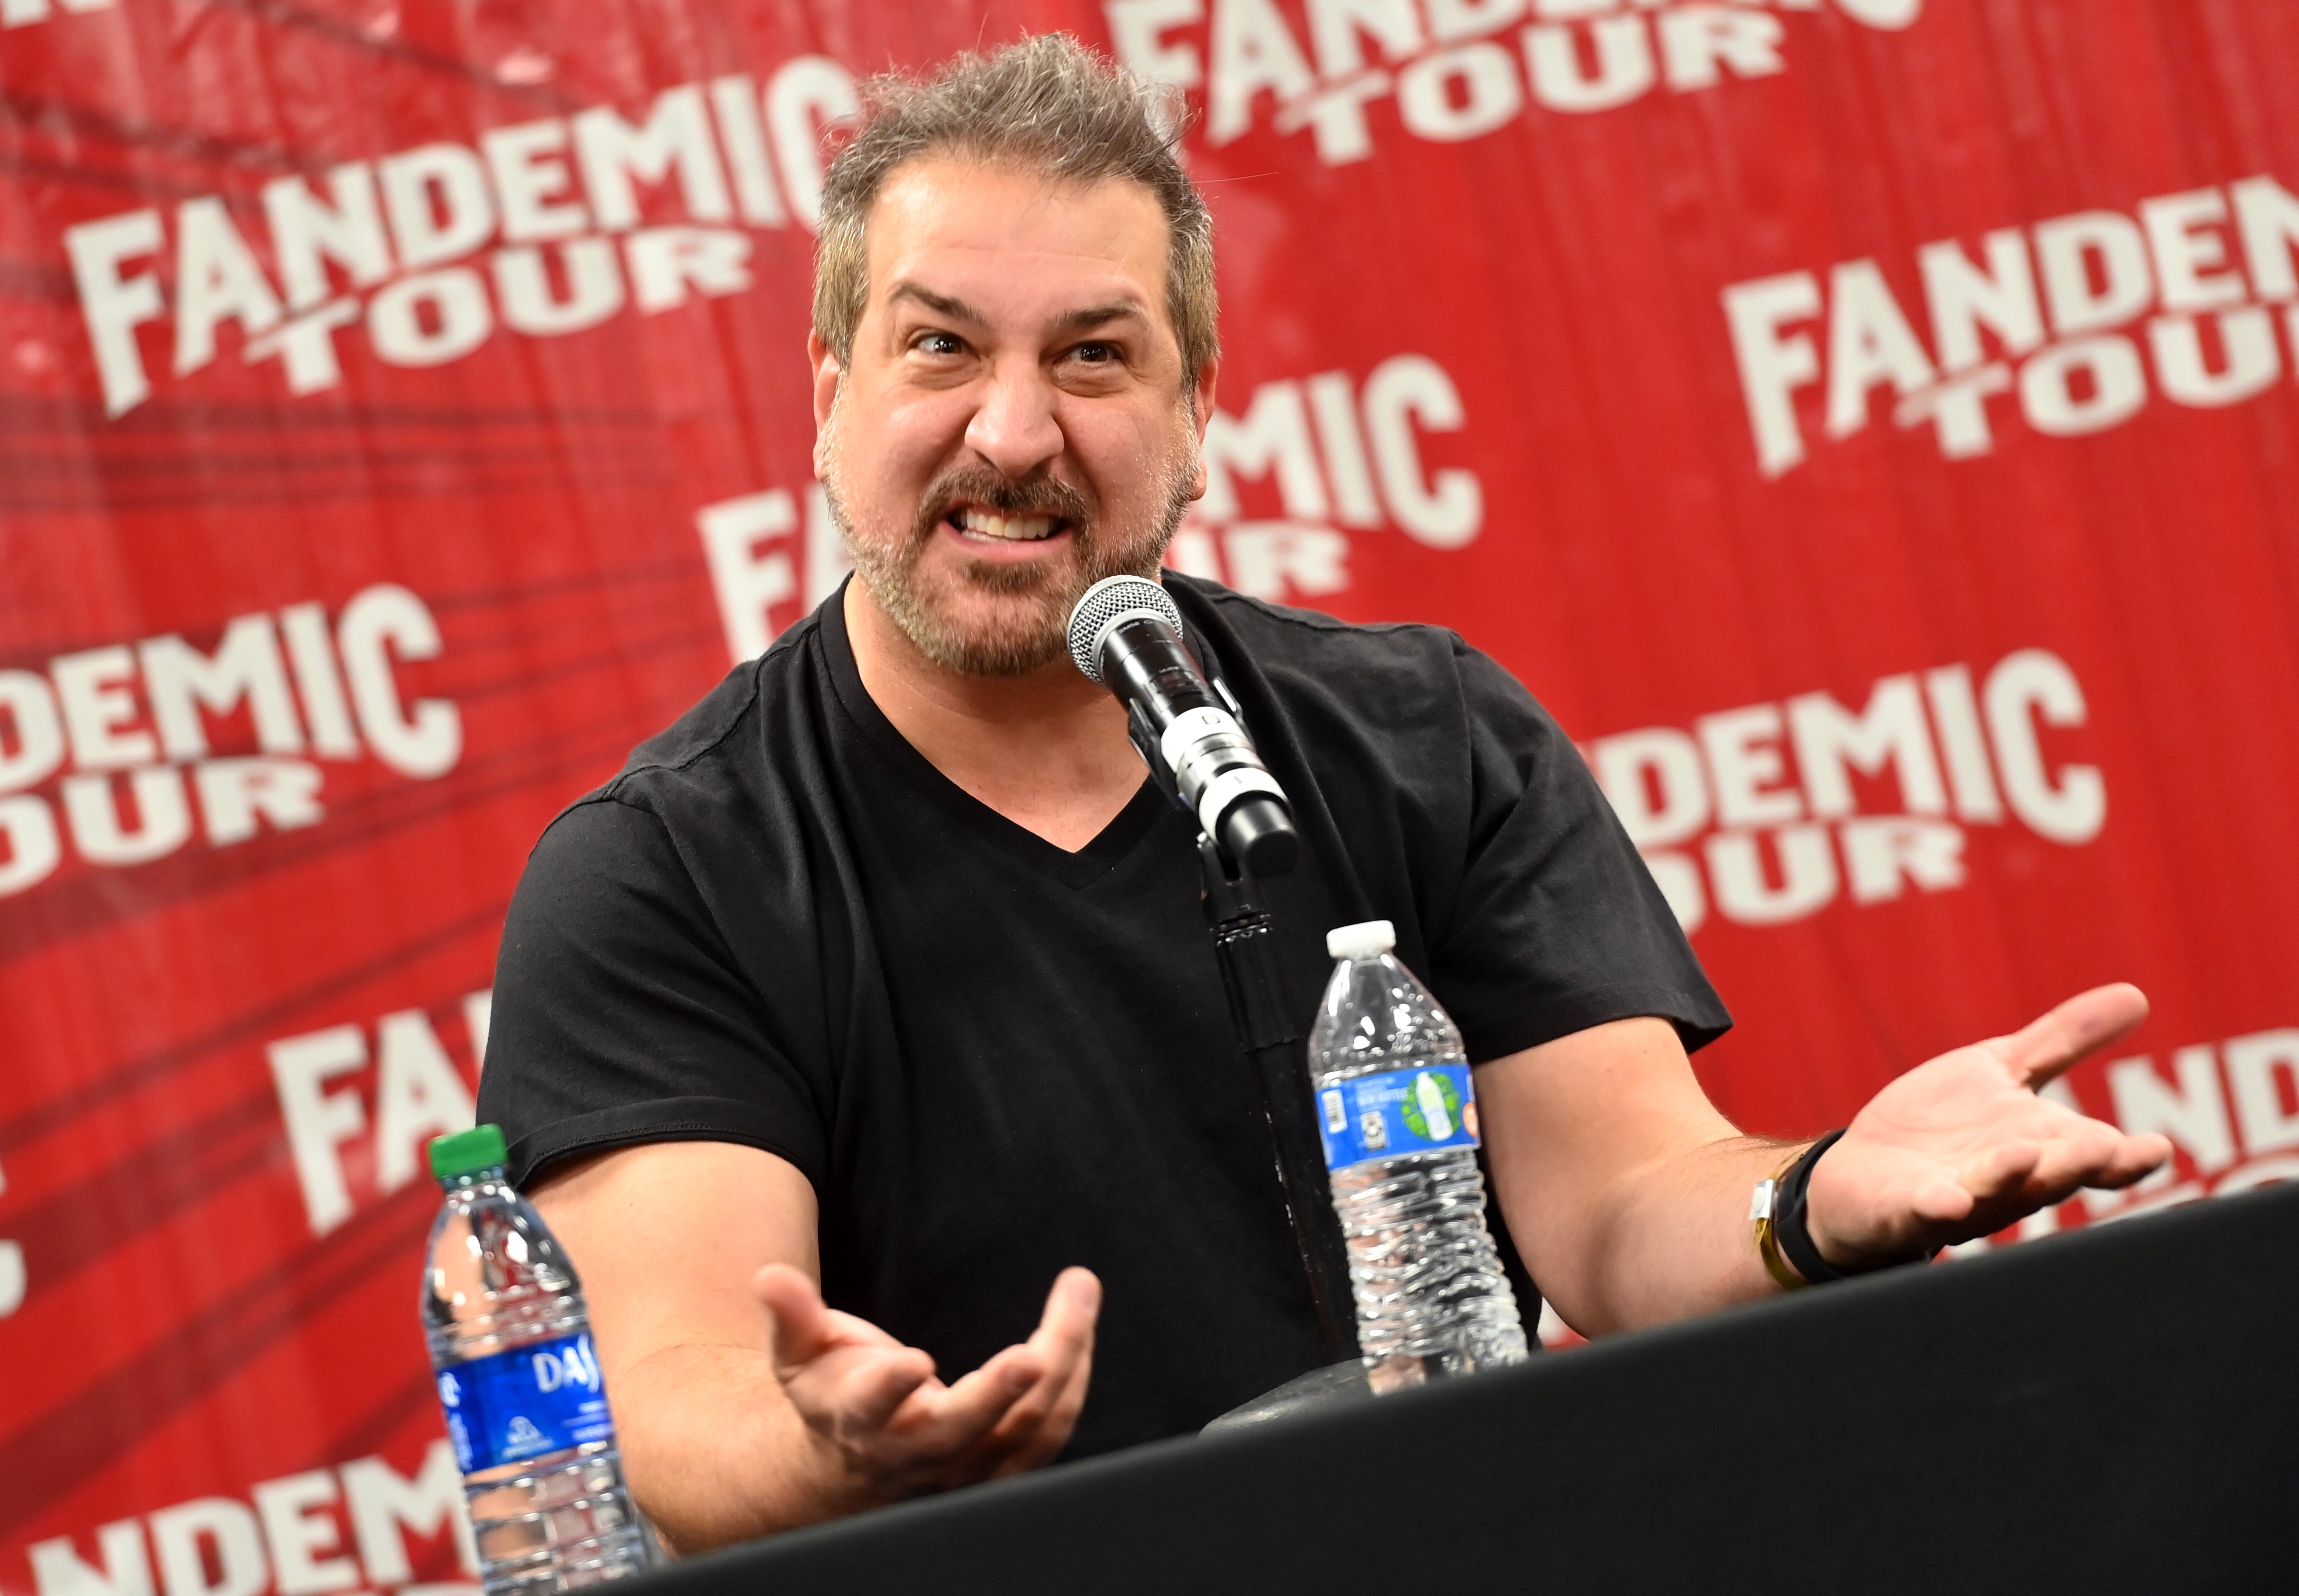 Singer Joey Fatone during the 2022 Fandemic Tour at Georgia World Congress Center, on March 19, 2022, in Atlanta, Georgia. | Source: Getty Images